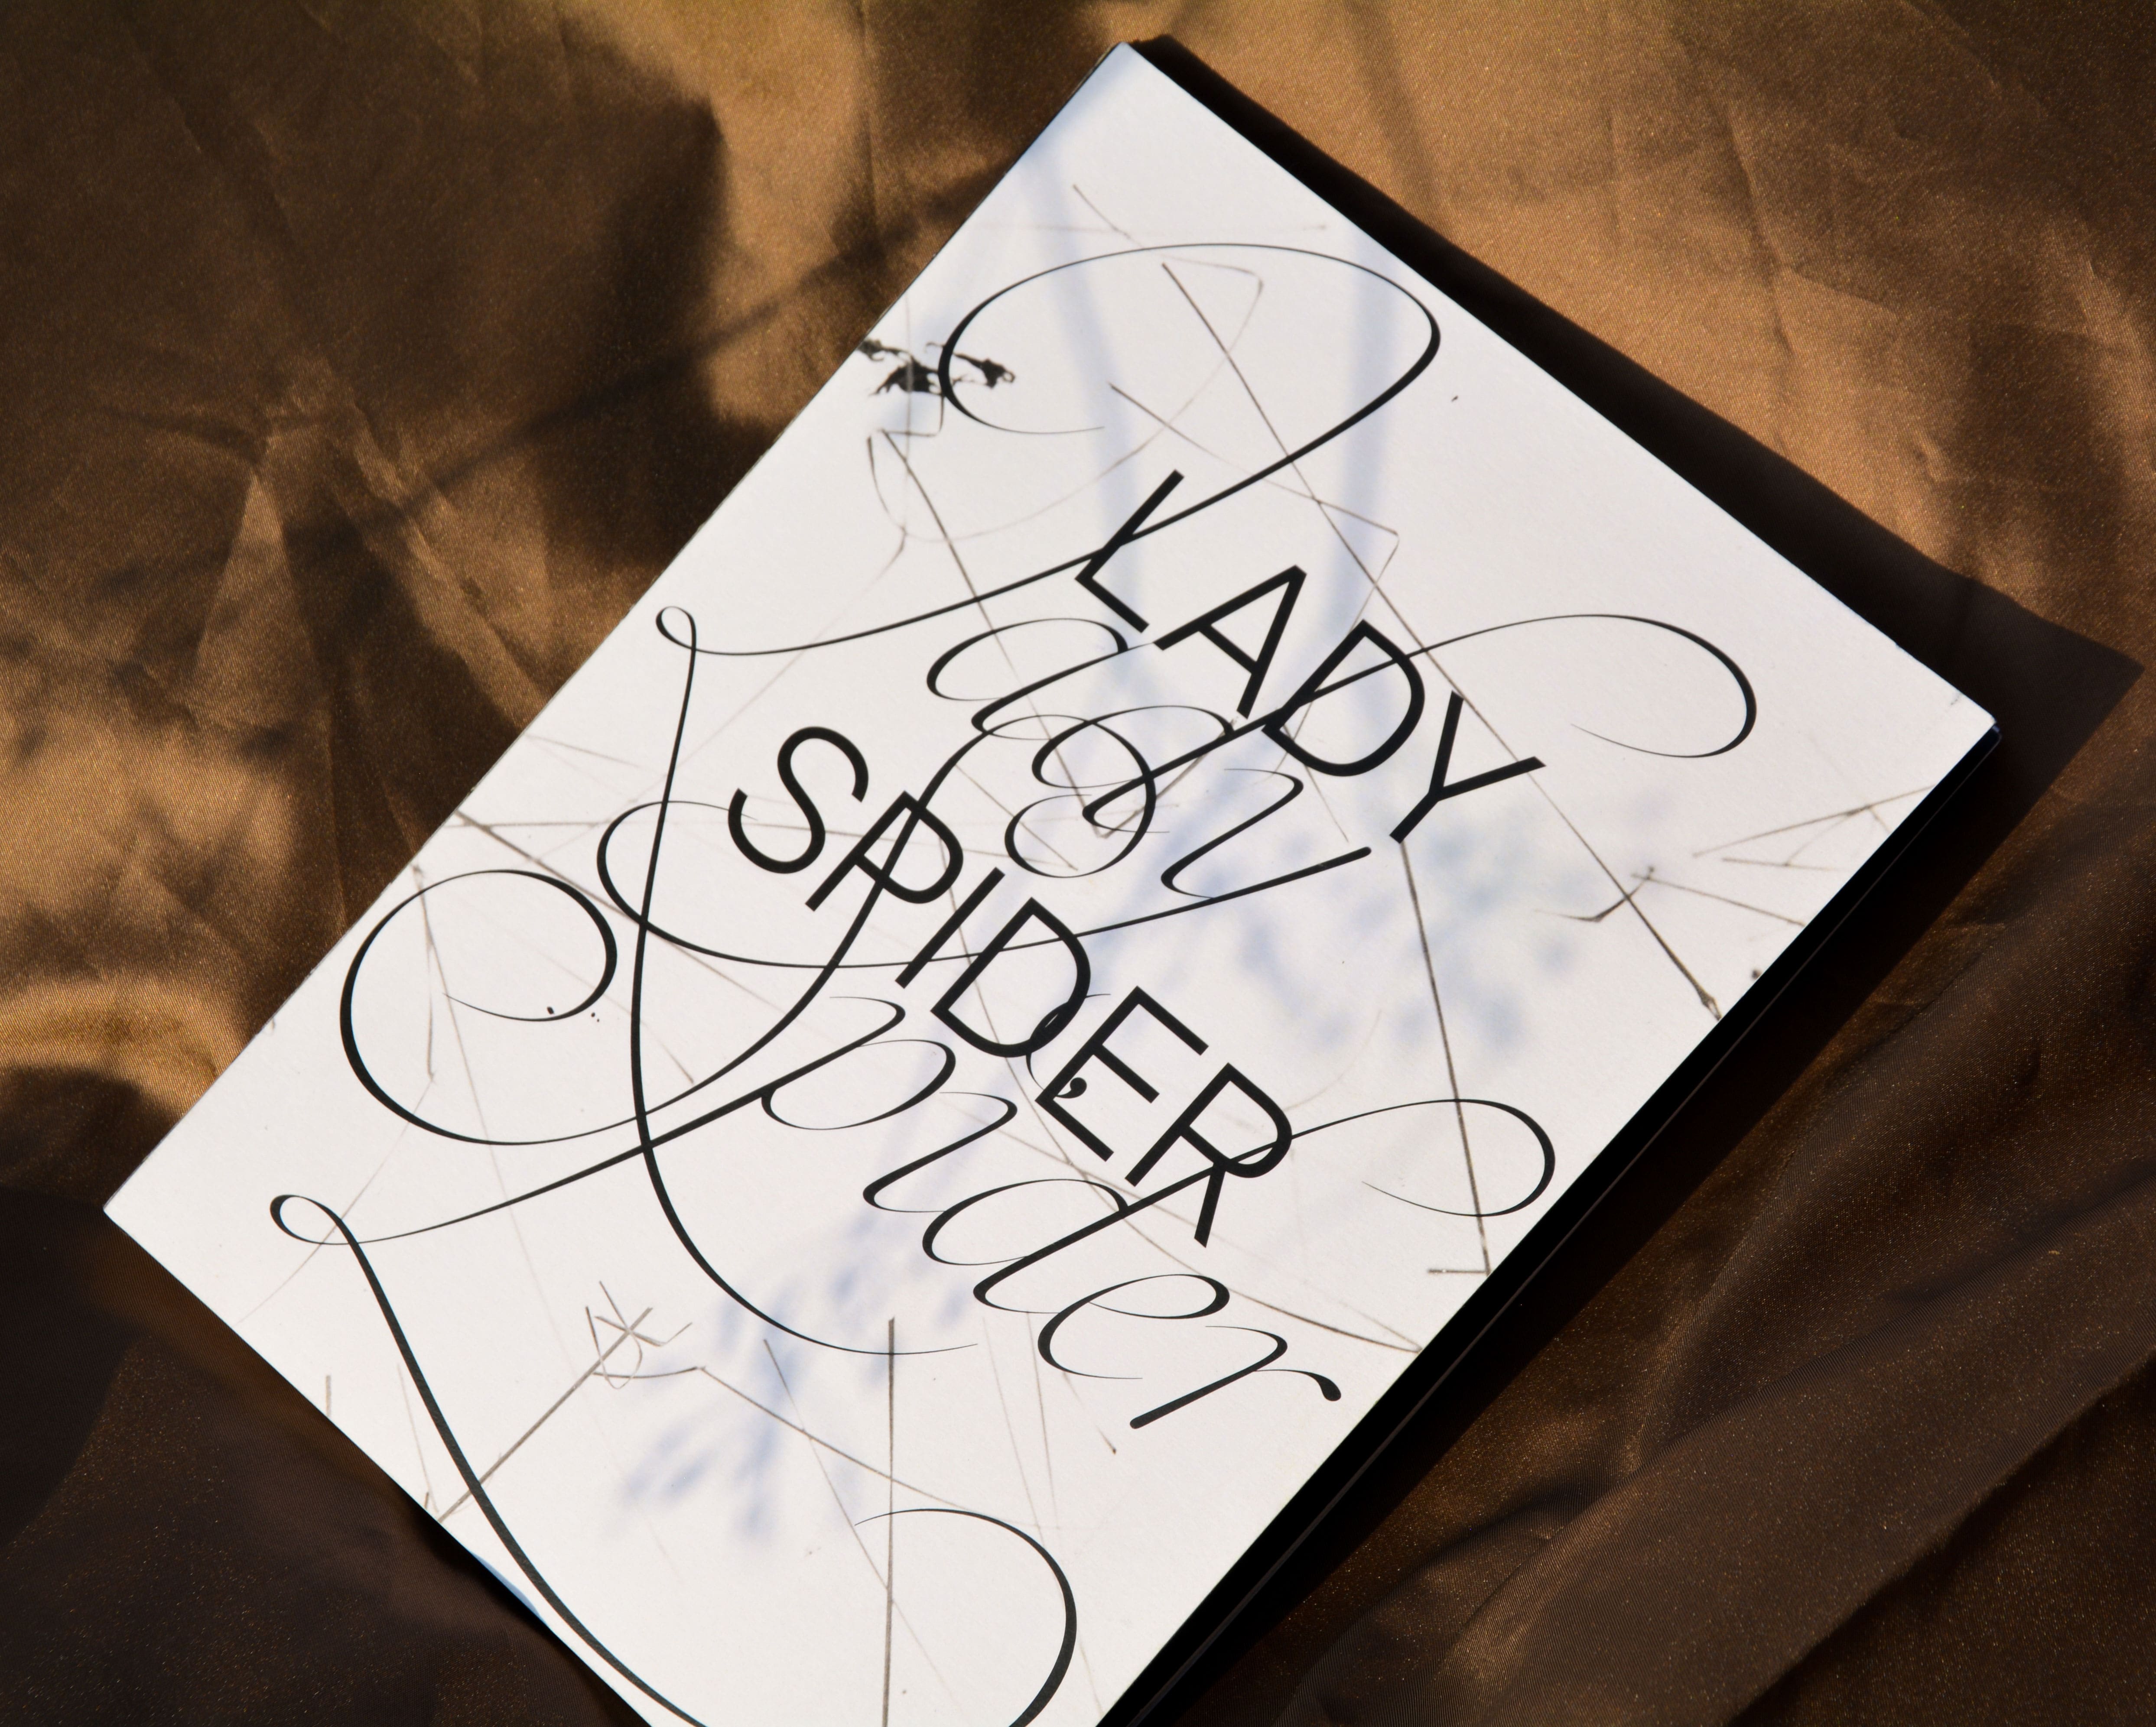 Lady Spider Céline Jouandet Call for Creatives